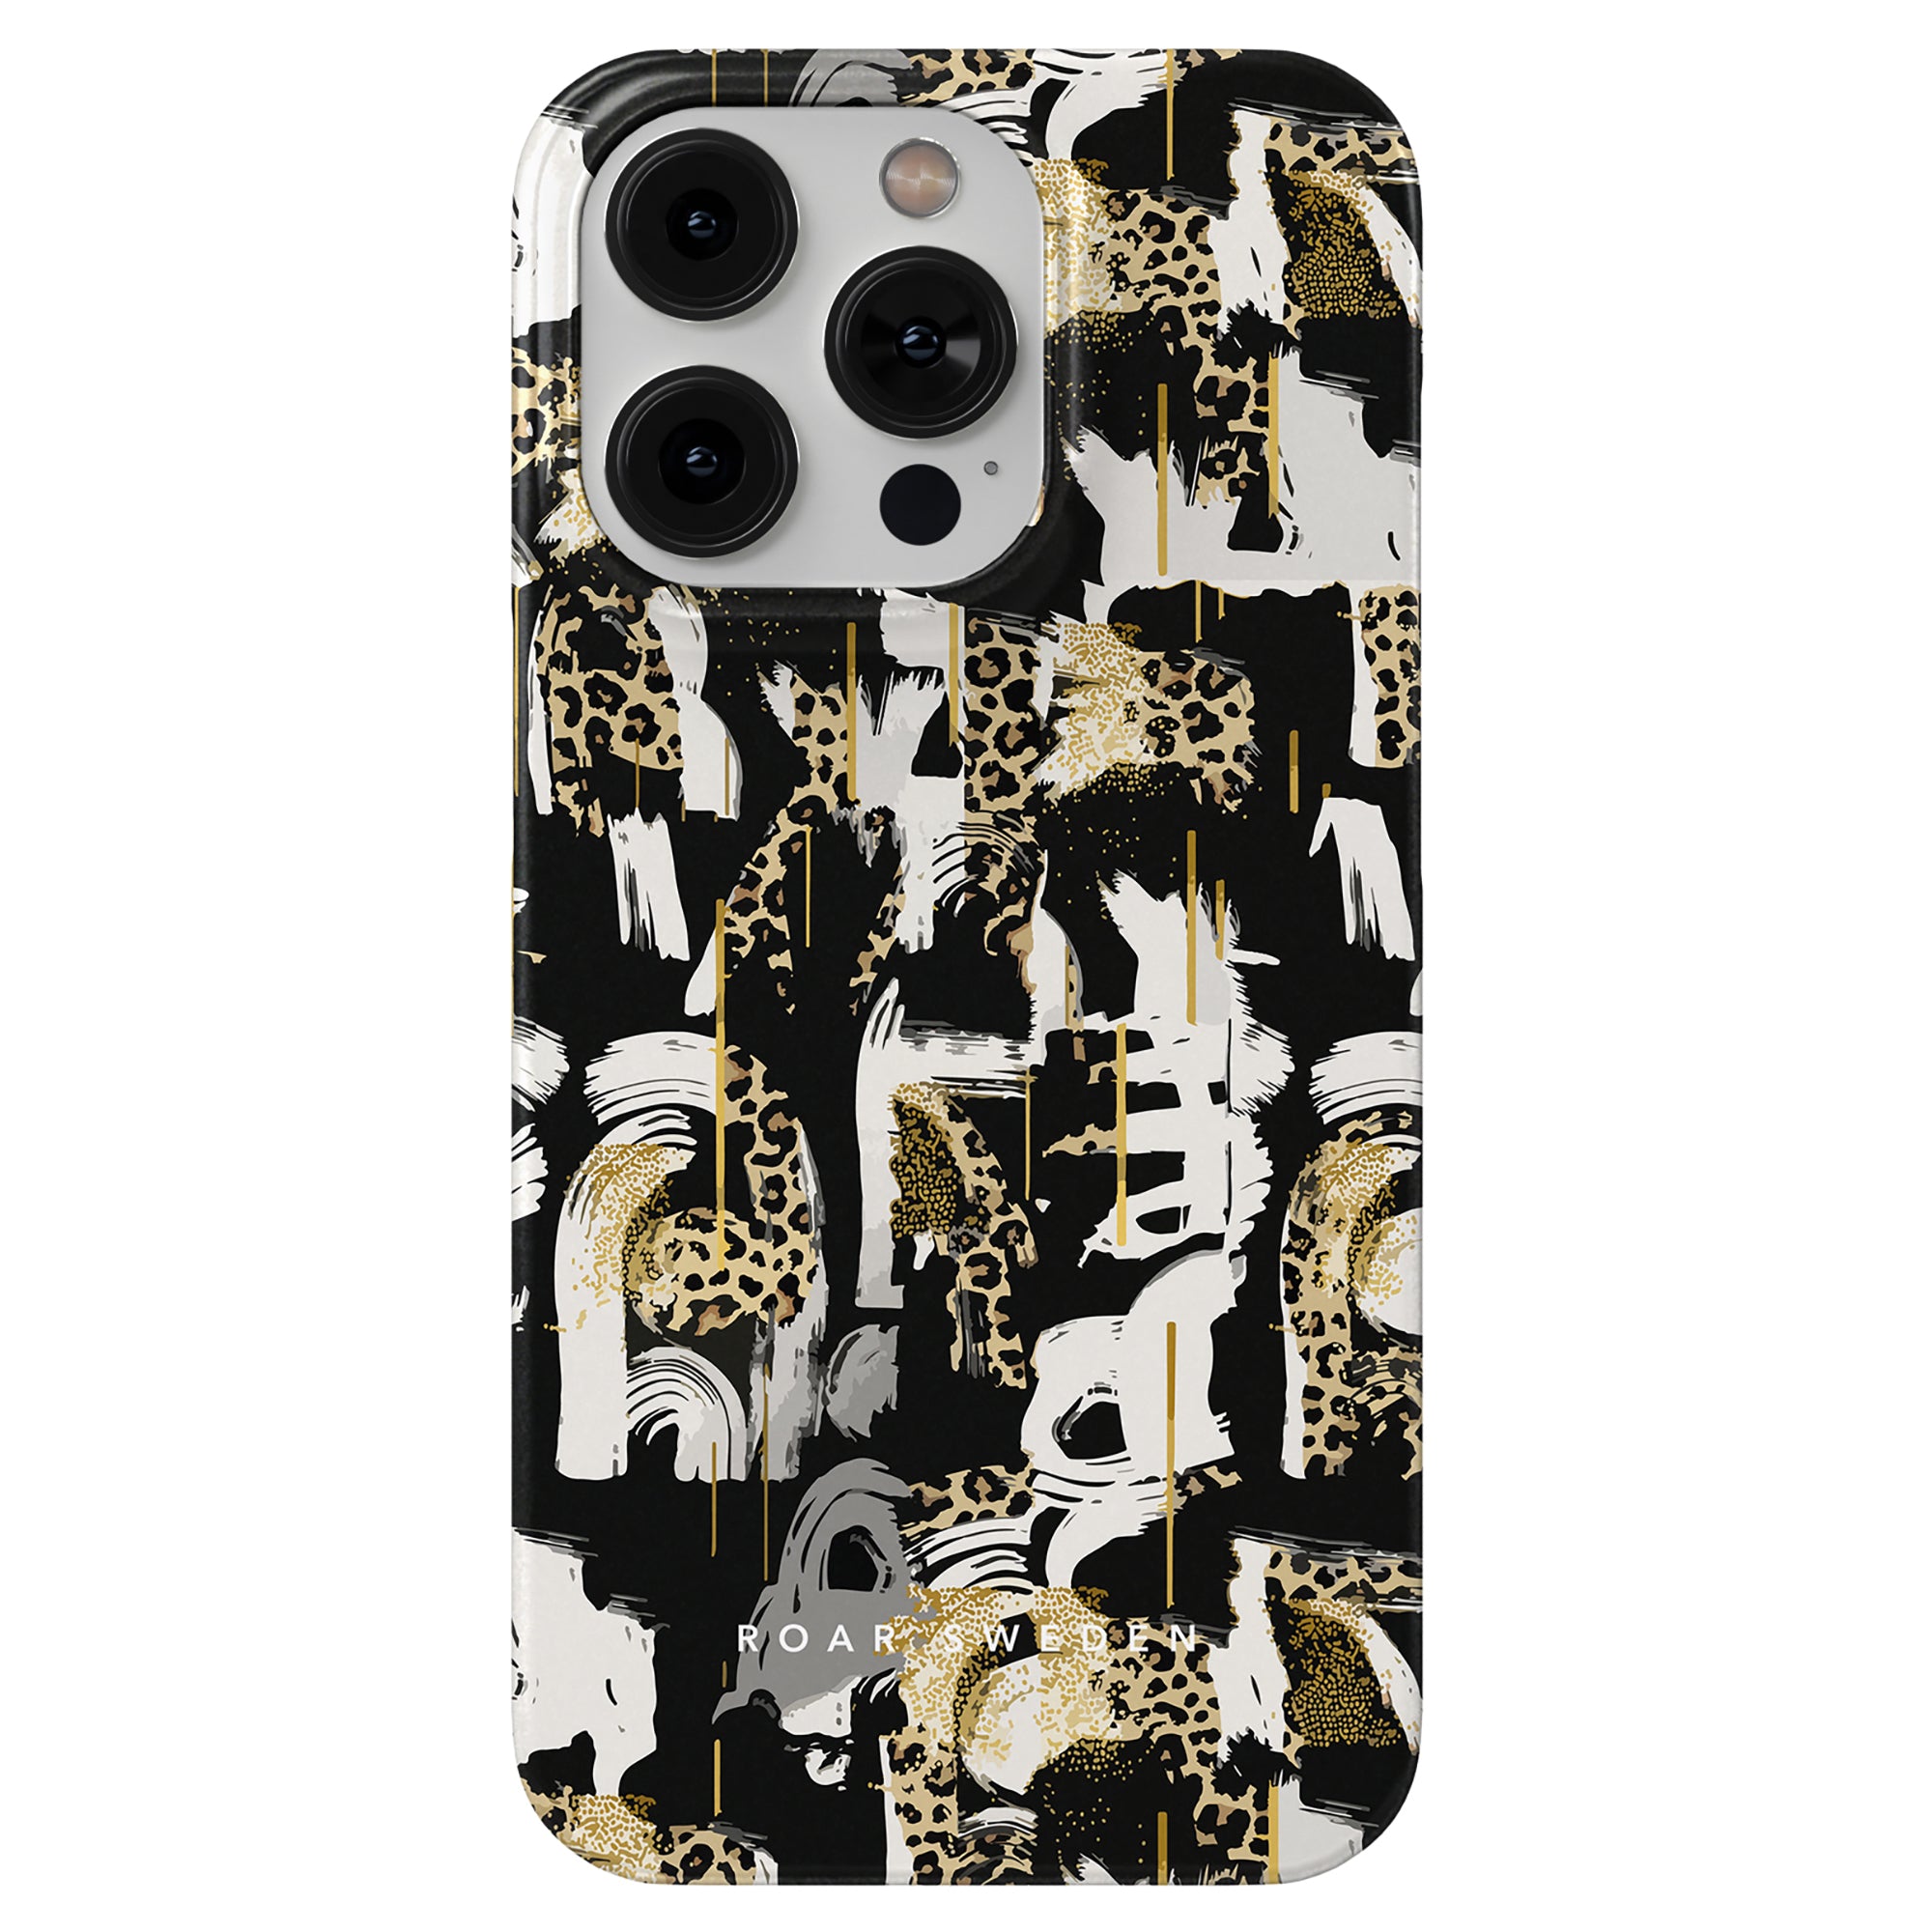 Skate Leo - Slim case: A black and gold phone case with giraffes on it.